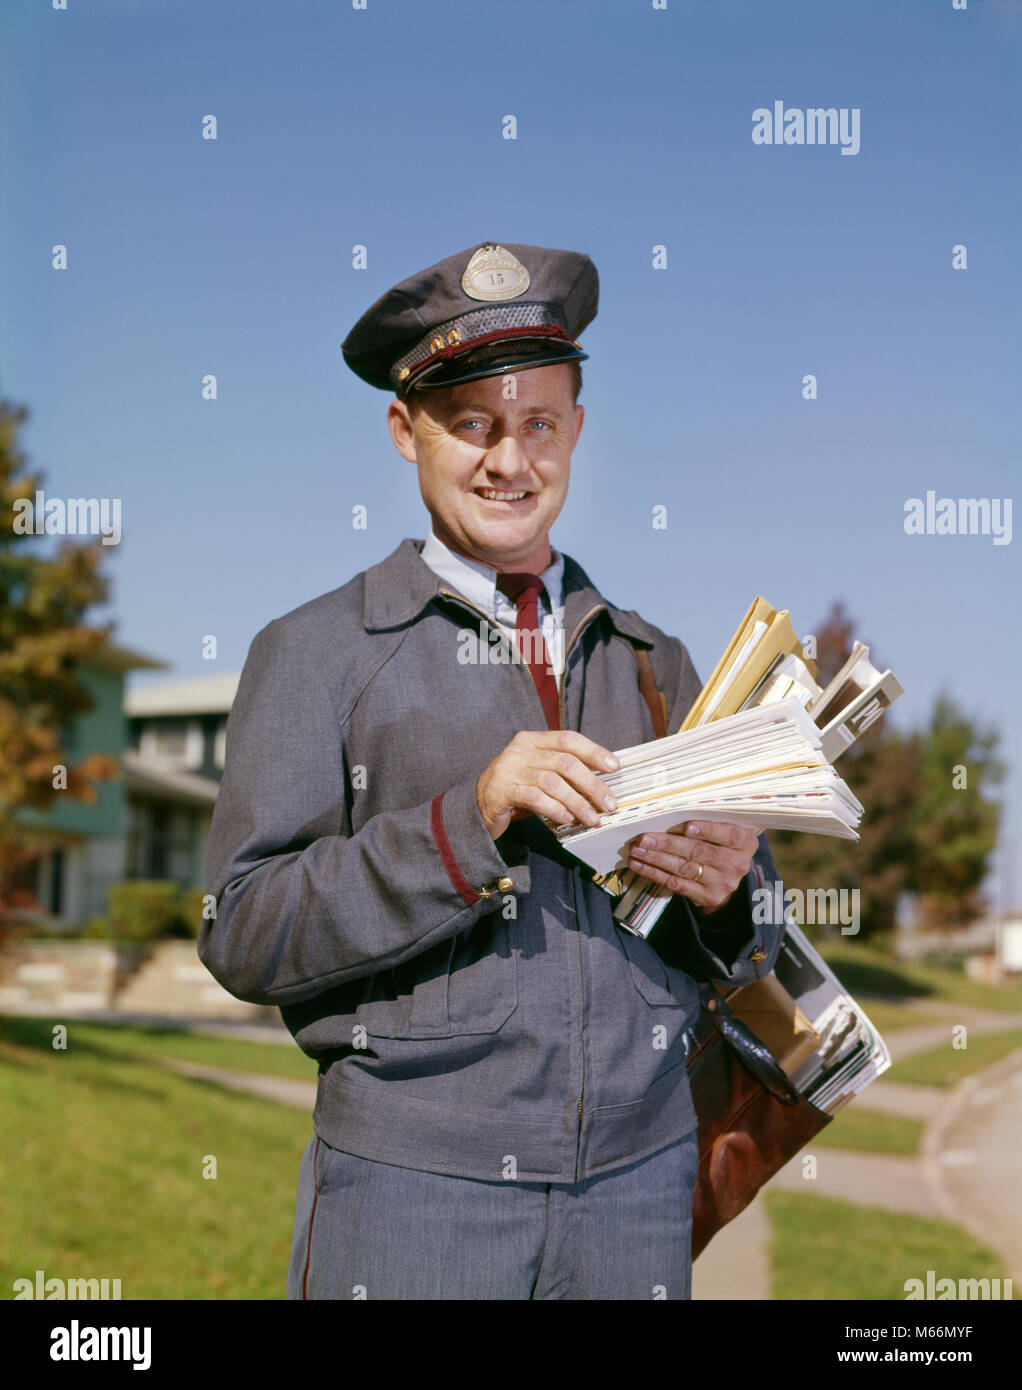 1960s PORTRAIT OF SMILING SUBURBAN MAILMAN LOOKING AT CAMERA - kp920 HAR001 HARS HEALTHINESS UNITED STATES COPY SPACE HALF-LENGTH POSTAL UNITED STATES OF AMERICA CONFIDENCE NOSTALGIA MIDDLE-AGED MIDDLE-AGED MAN EYE CONTACT 40-45 YEARS 45-50 YEARS GOALS SKILL OCCUPATION HAPPINESS SKILLS CUSTOMER SERVICE NOBODY PRIDE MAILMAN PEOPLE OCCUPATIONS USPS MAILBAG MALES CAUCASIAN ETHNICITY LOOKING AT CAMERA MAIL CARRIER OCCUPATIONS OLD FASHIONED PERSONS POST OFFICE POSTAL SERVICE POSTAL WORKER Stock Photo